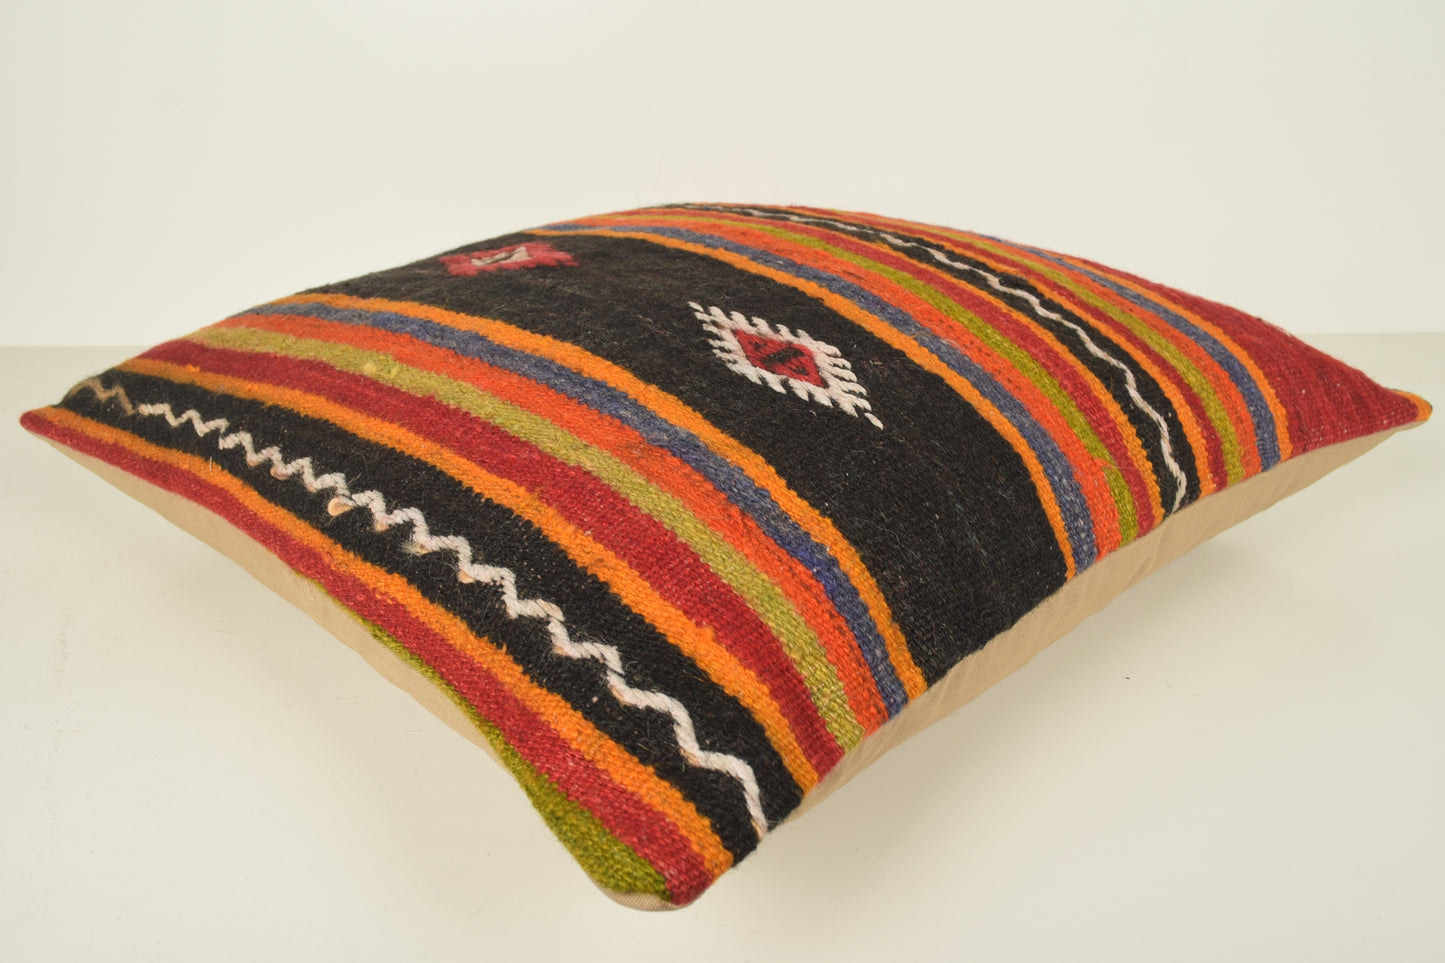 Kilim Pillow Covers for Sale A00868 Inexpensive pillow covers Moroccan pillow cases 24x24